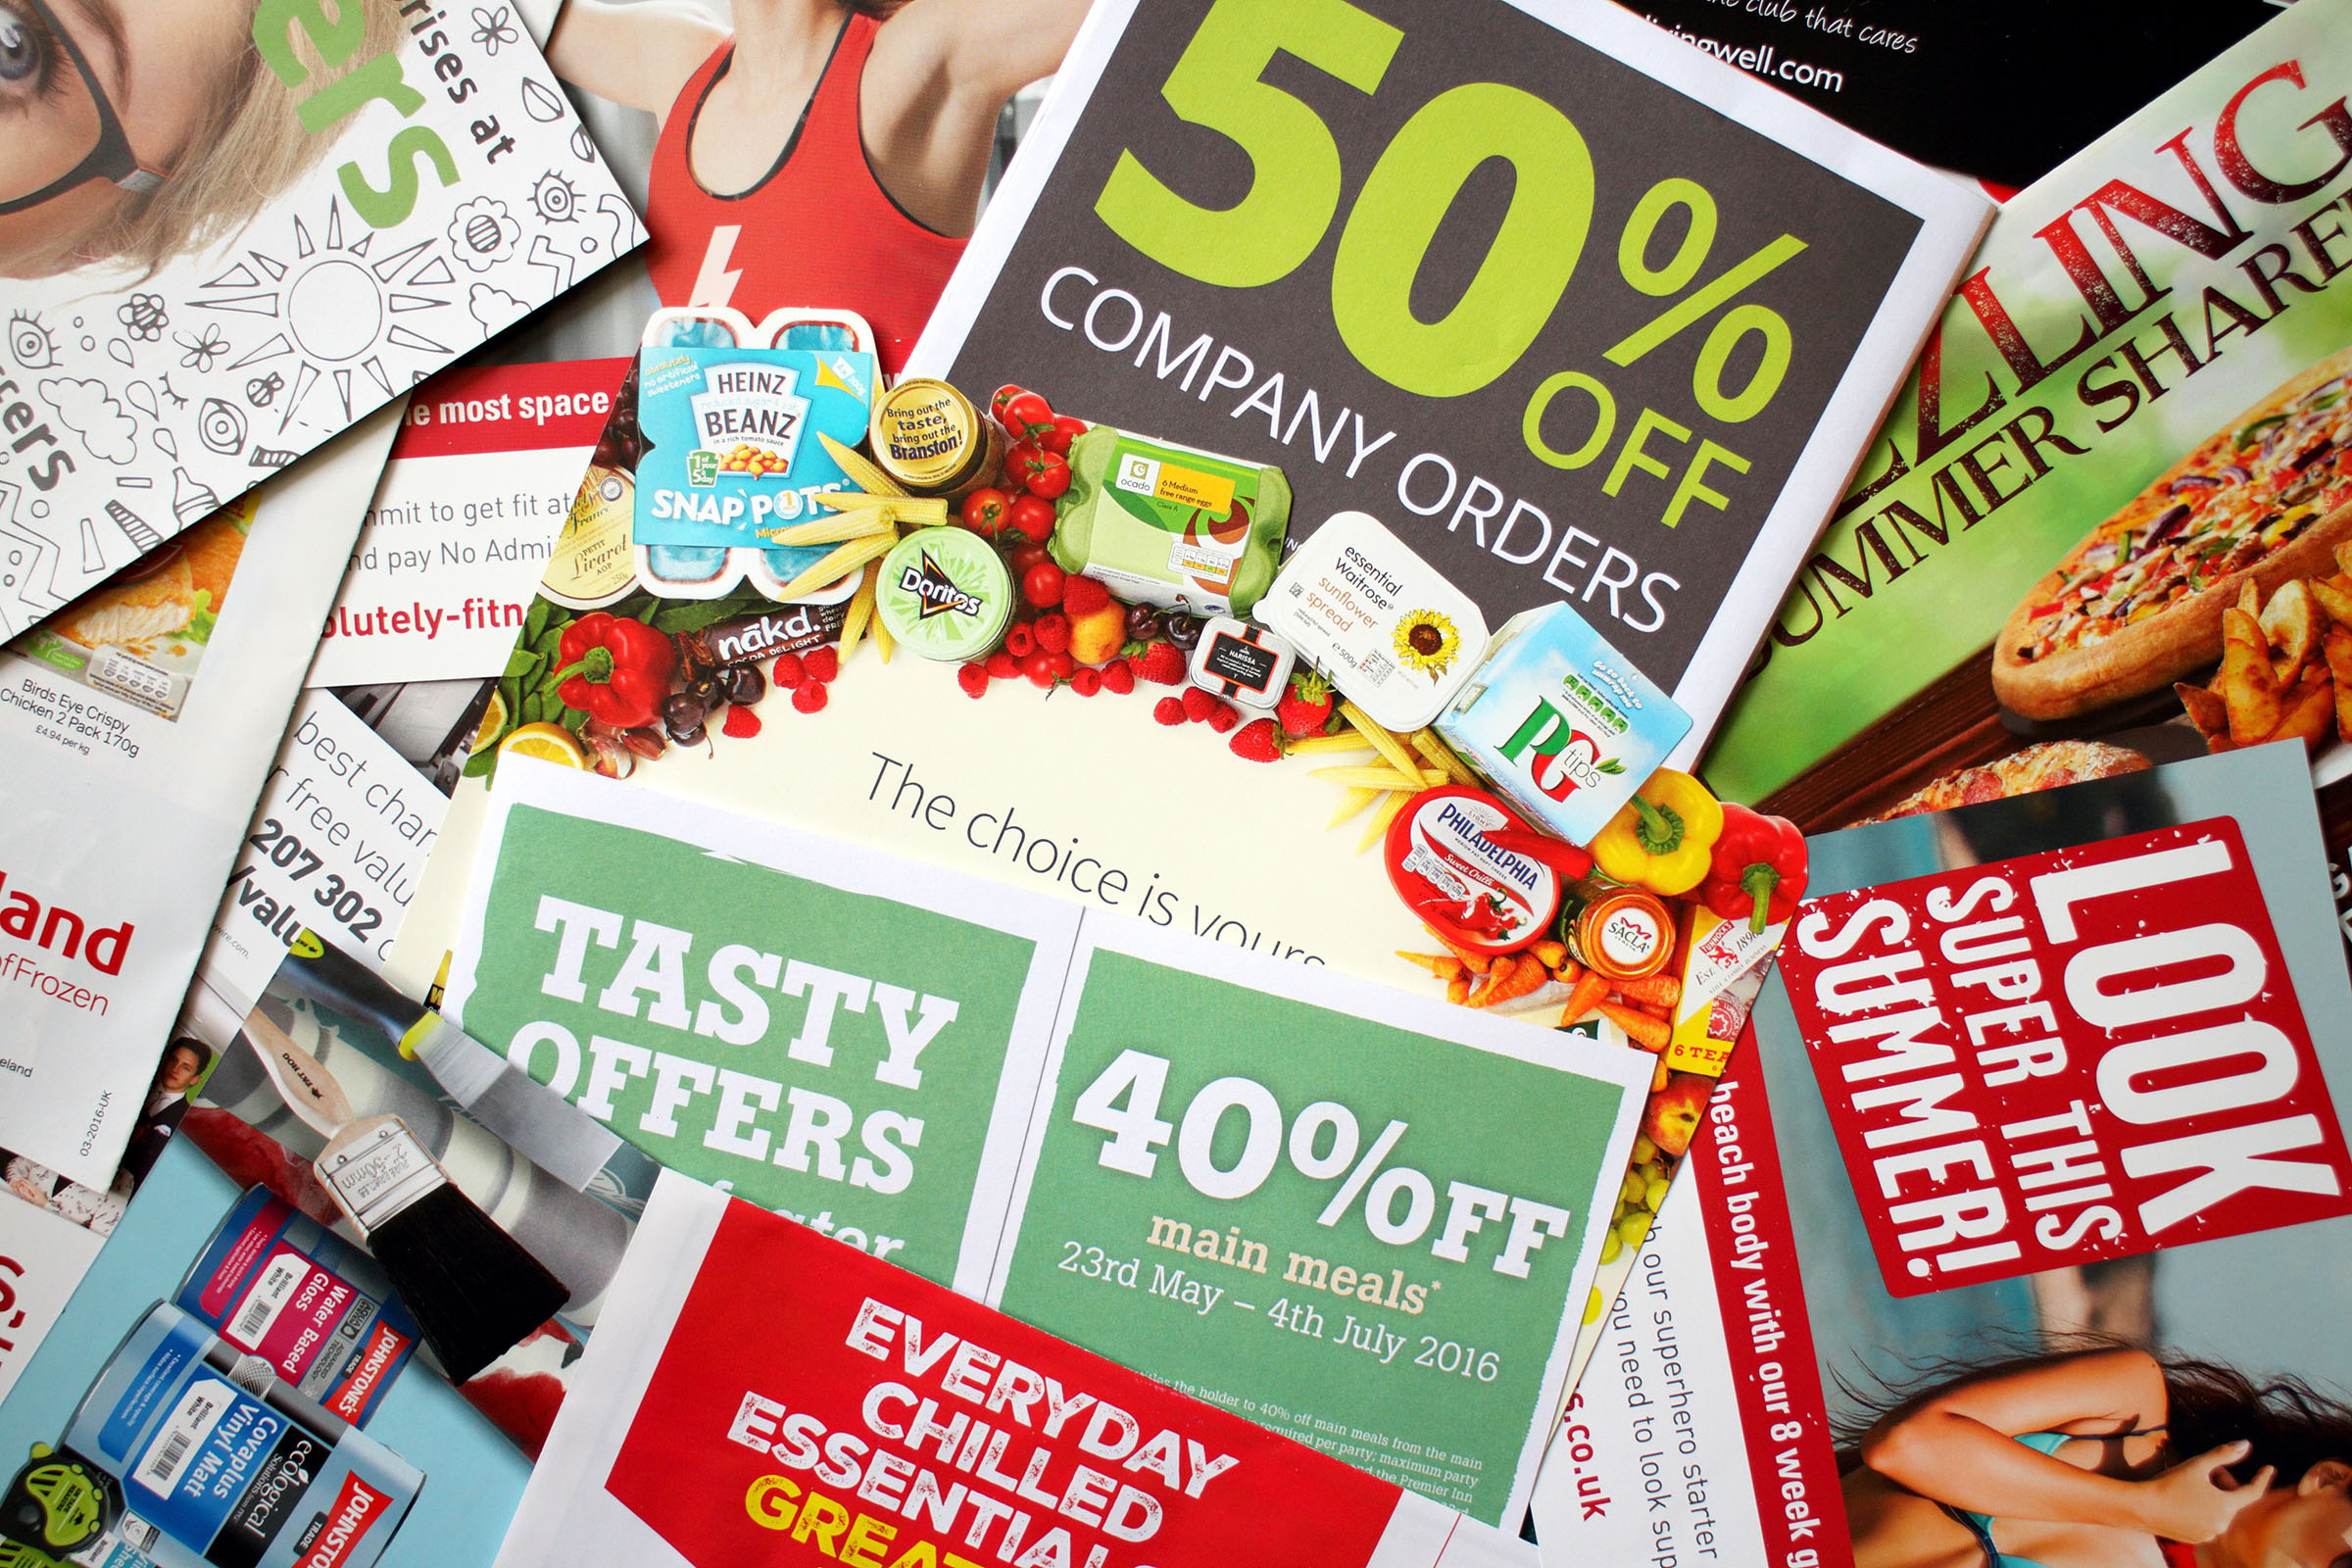 Examples of low-impact direct mail ads